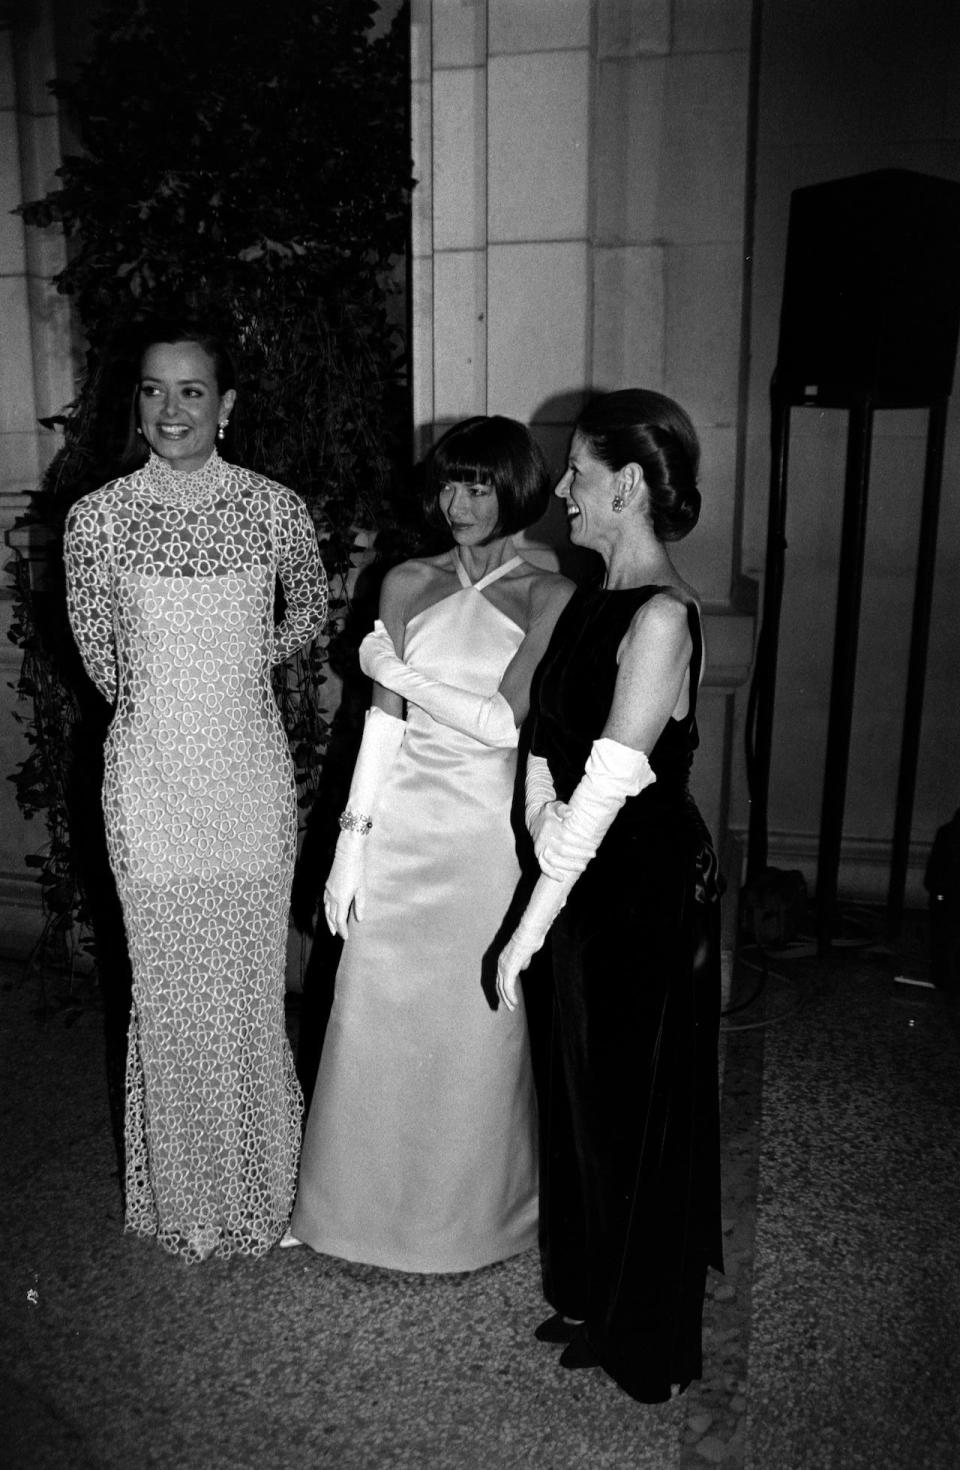 Clarissa Alcock, Anna Wintour, and Annette Reed at the 1995 Met Gala.